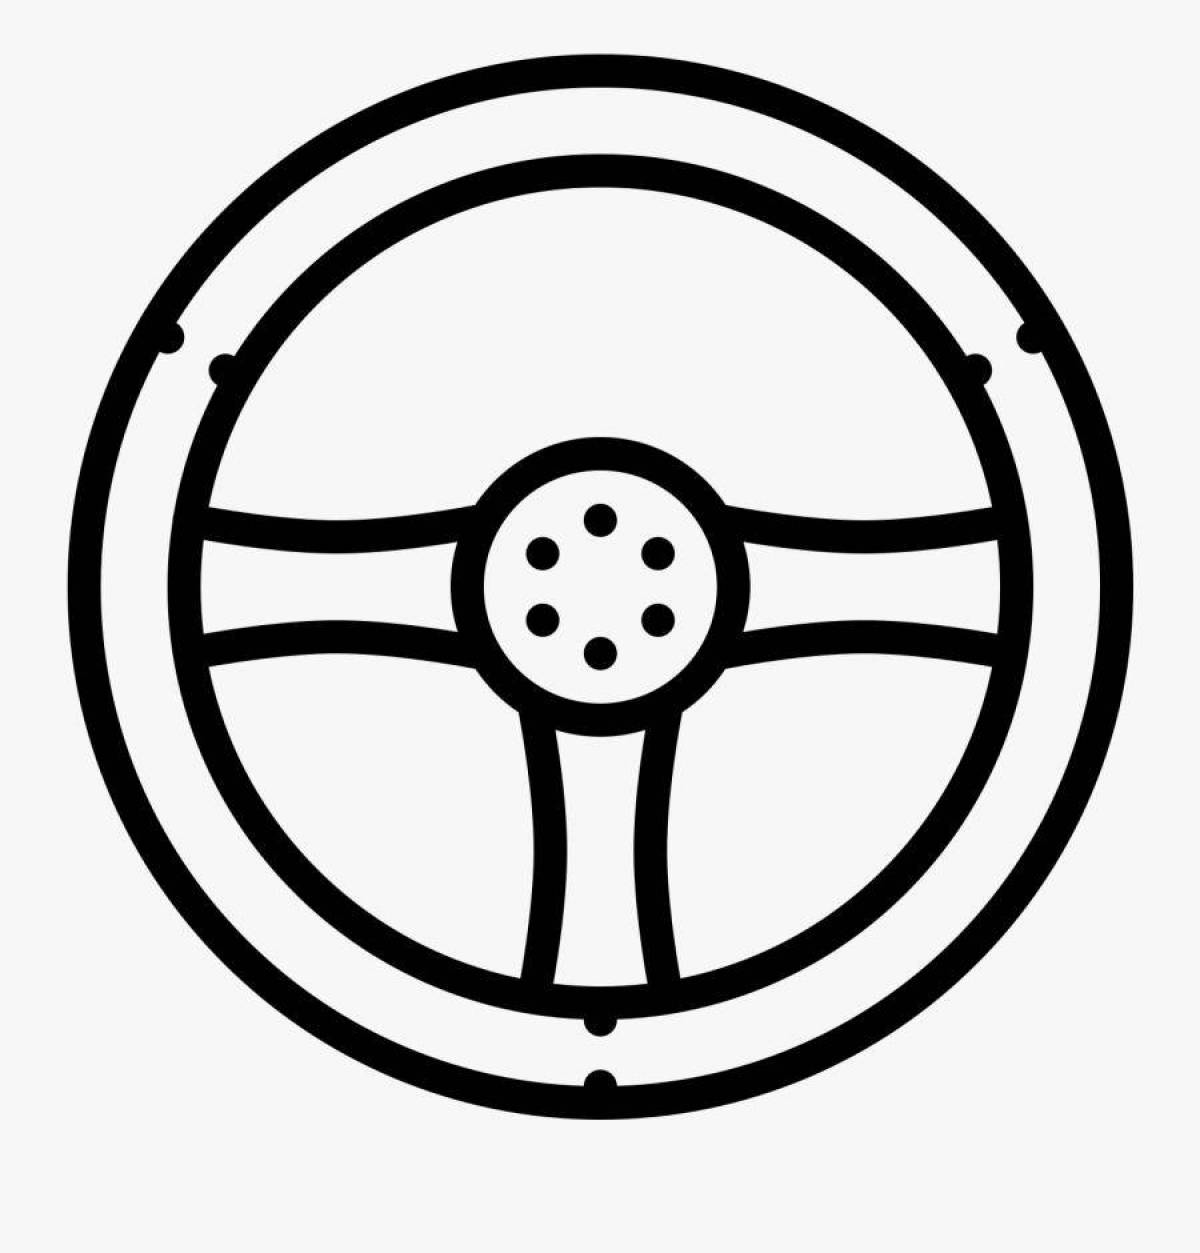 Coloring page of steering wheel for kids car